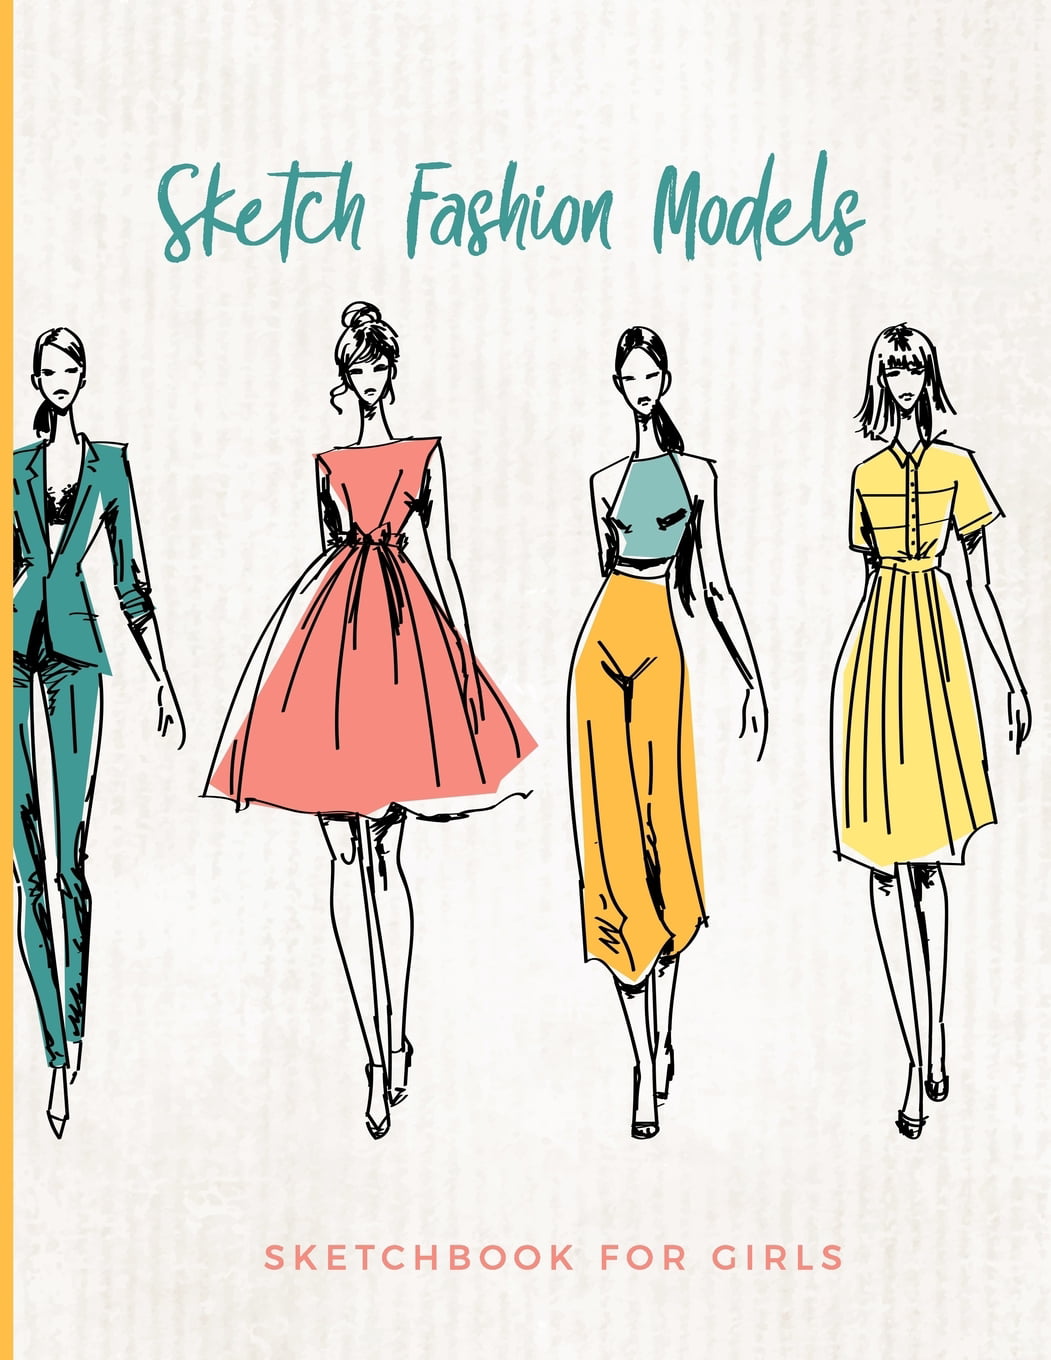 How to draw a fashion sketches like a fashion designer in 15 minutes 